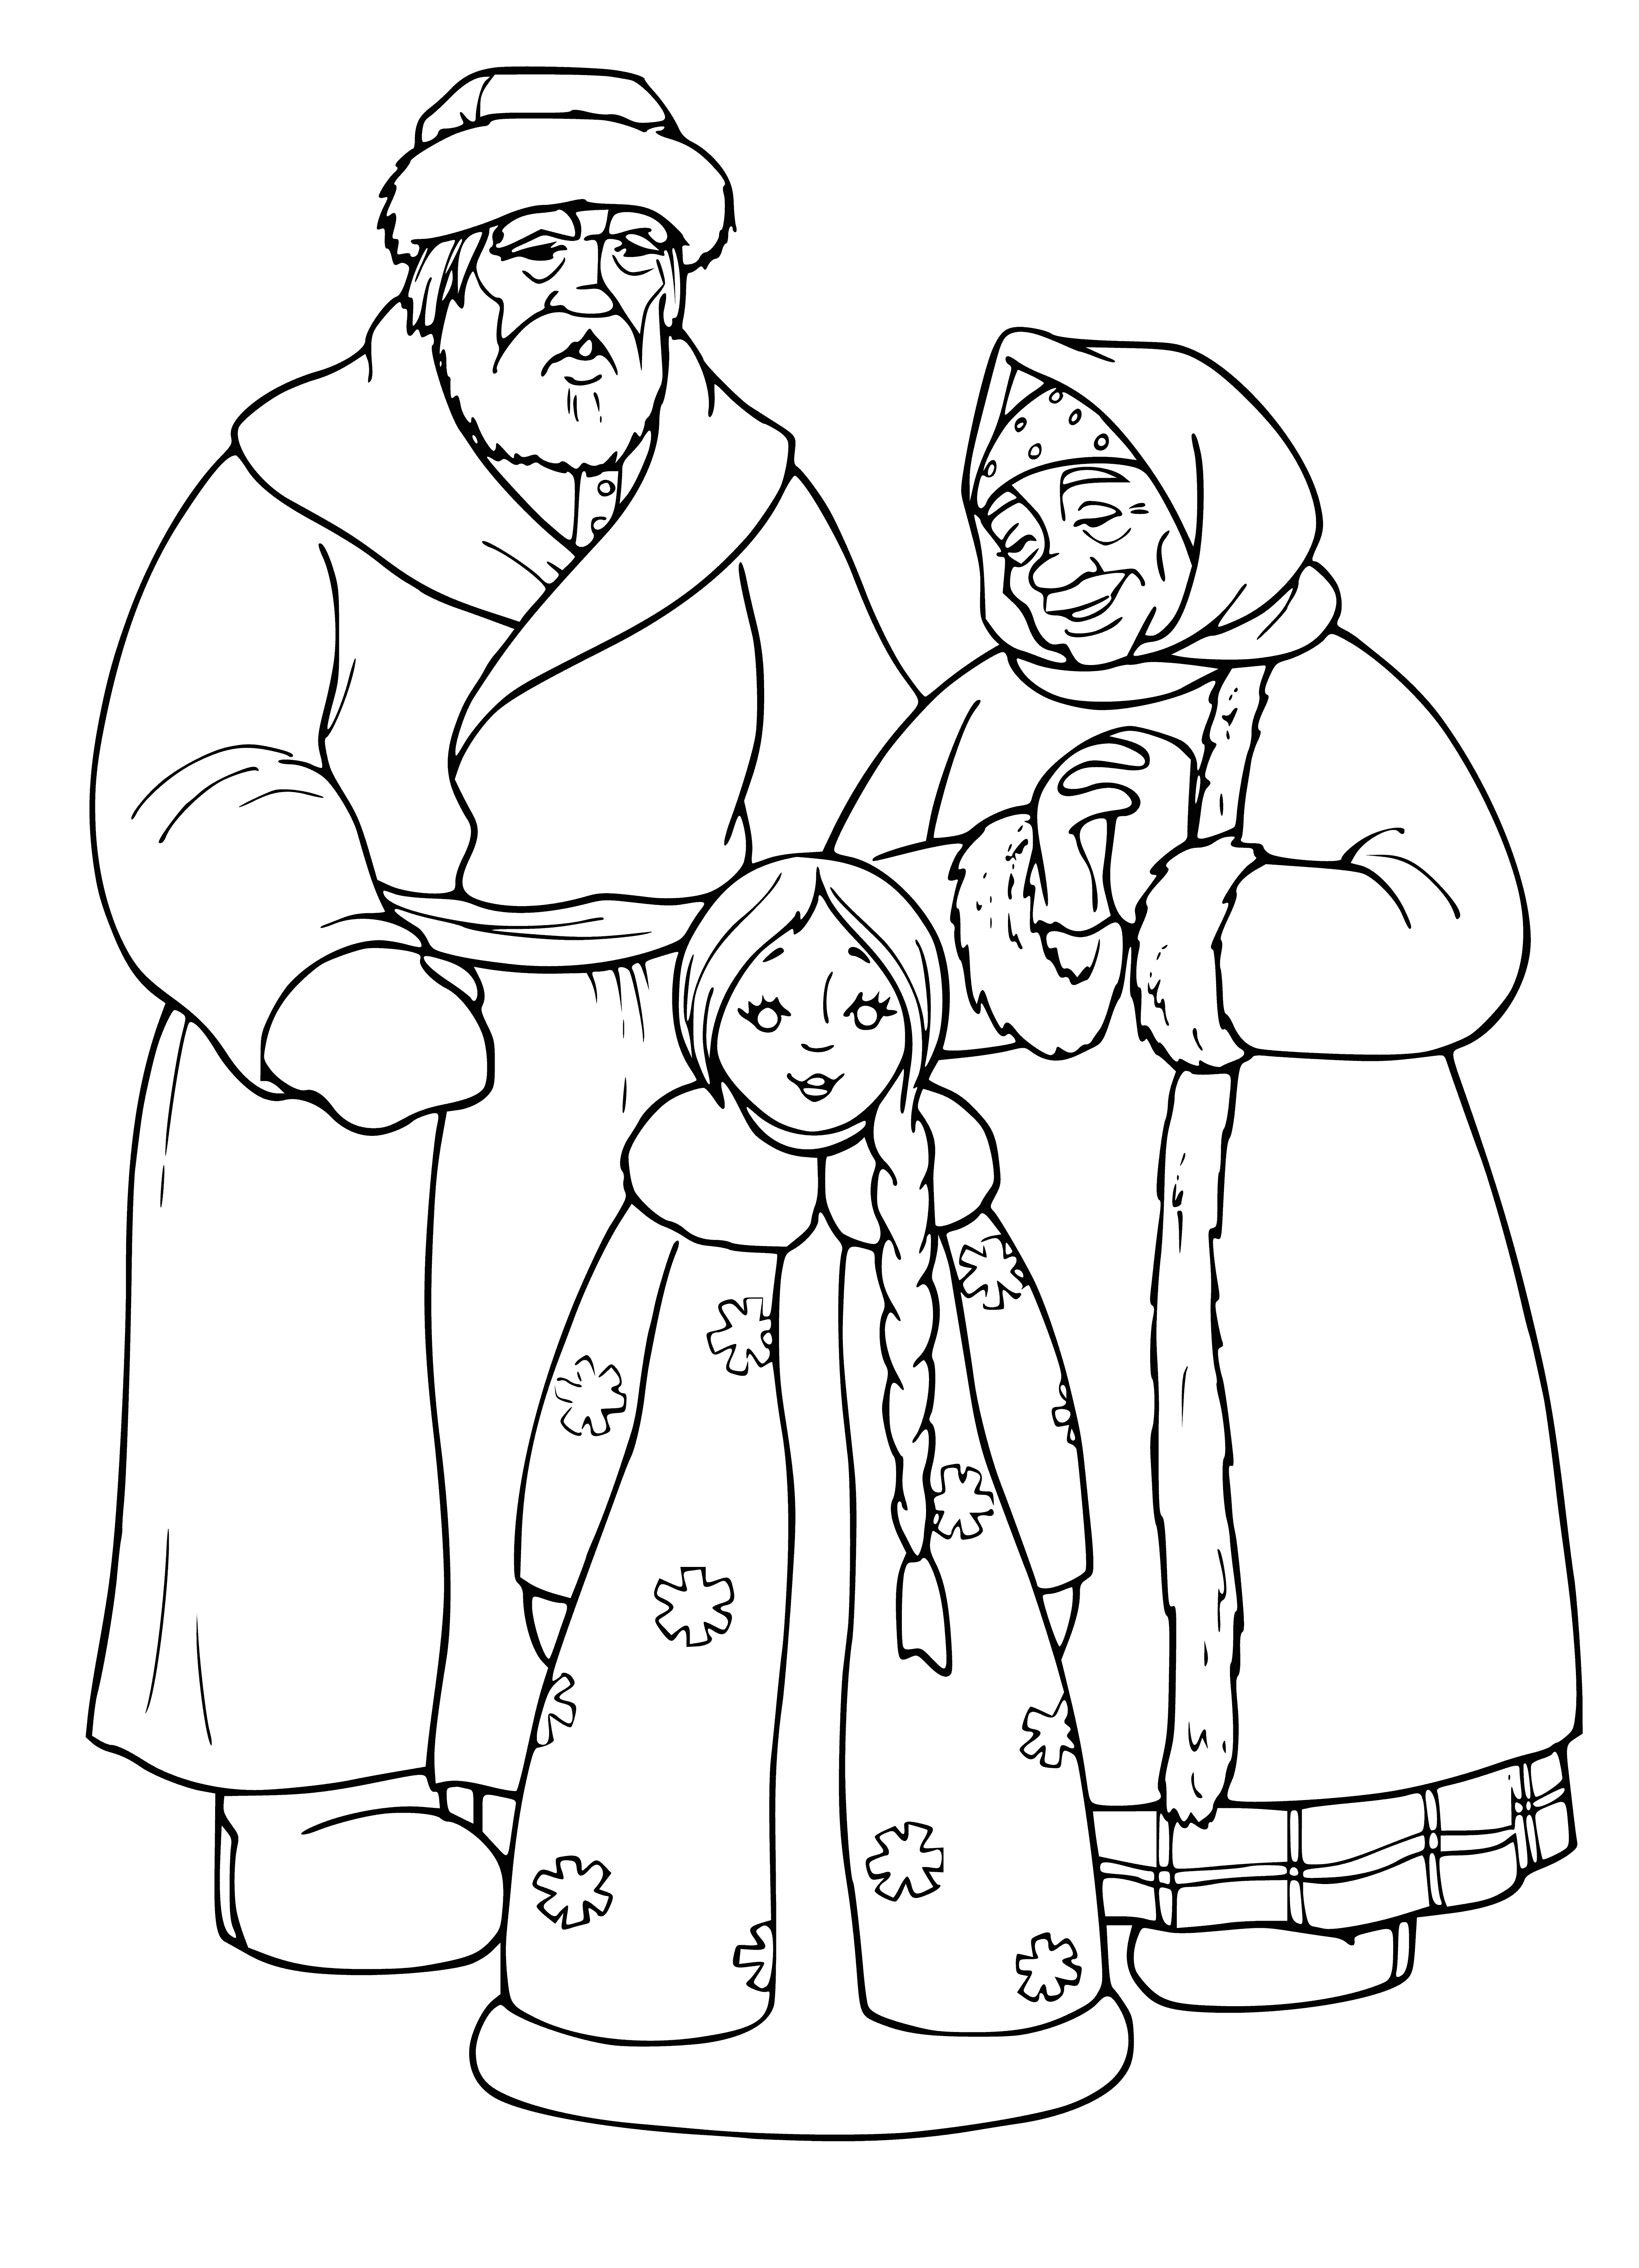 coloring page: Girl of snow, blue scarf, broom, sitting in snowy forest.